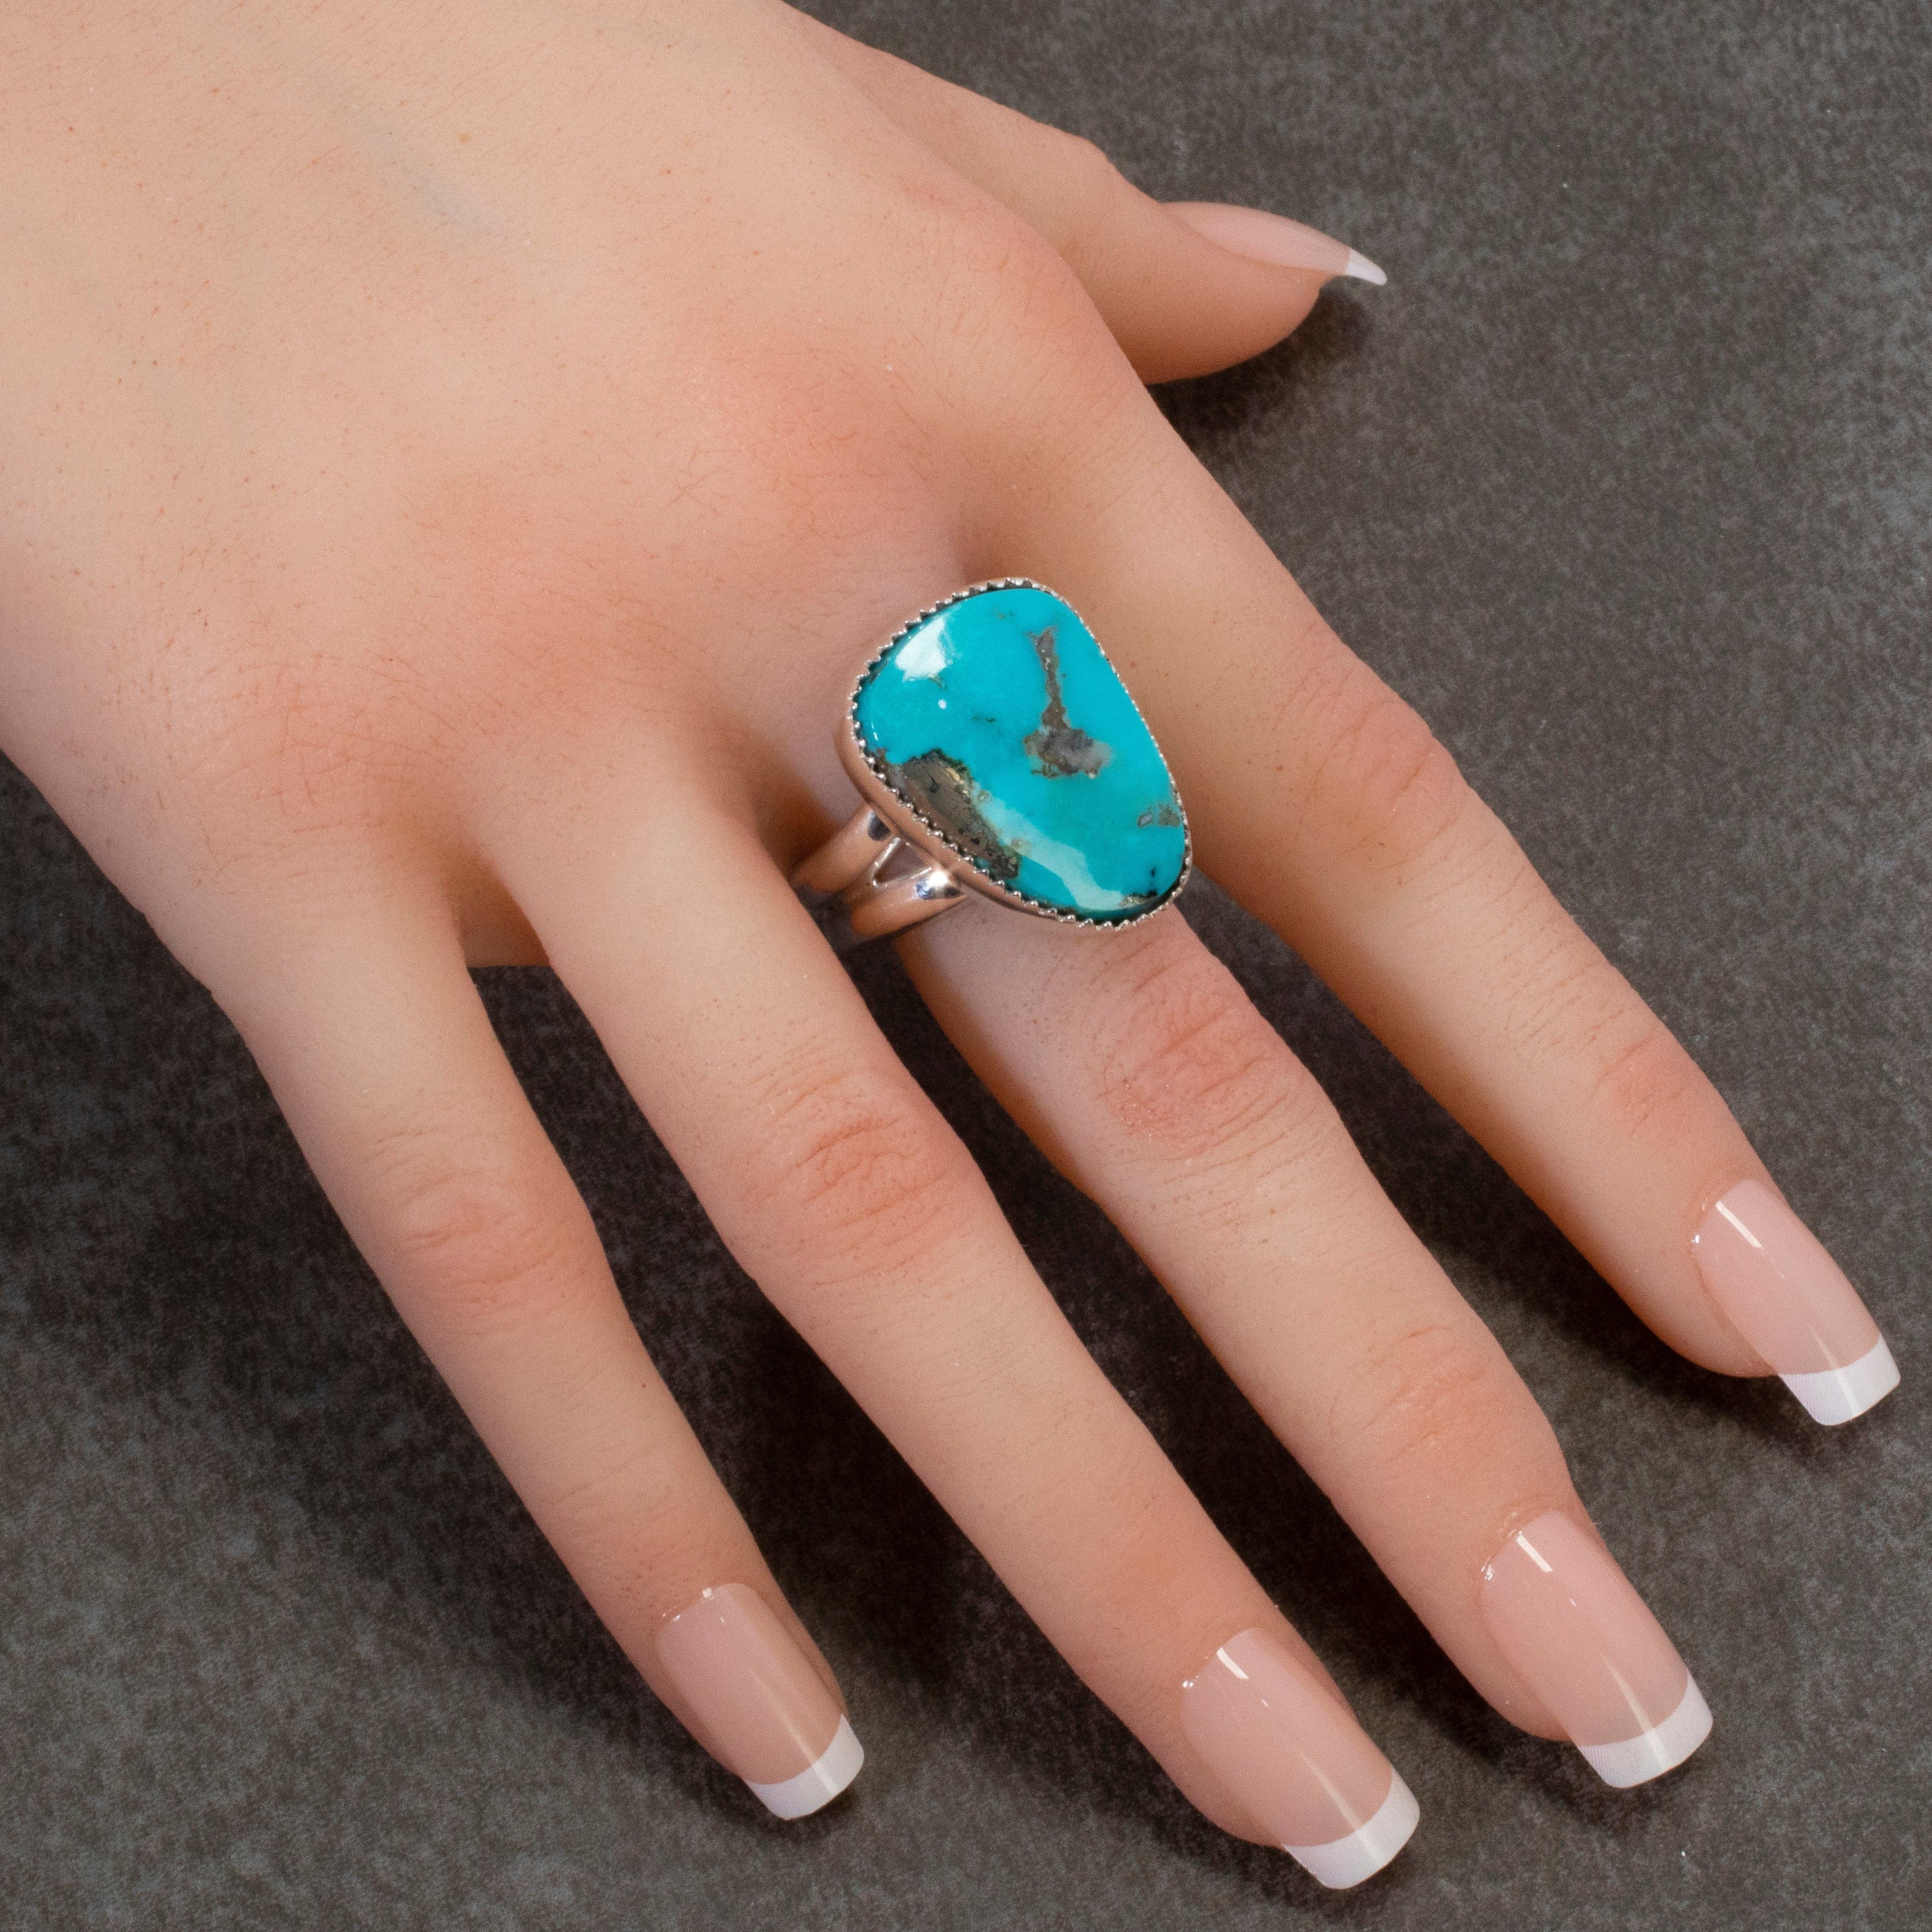 Kalifano Southwest Silver Jewelry 11 Kingman Turquoise USA Handmade 925 Sterling Silver Ring NMR450.002.11